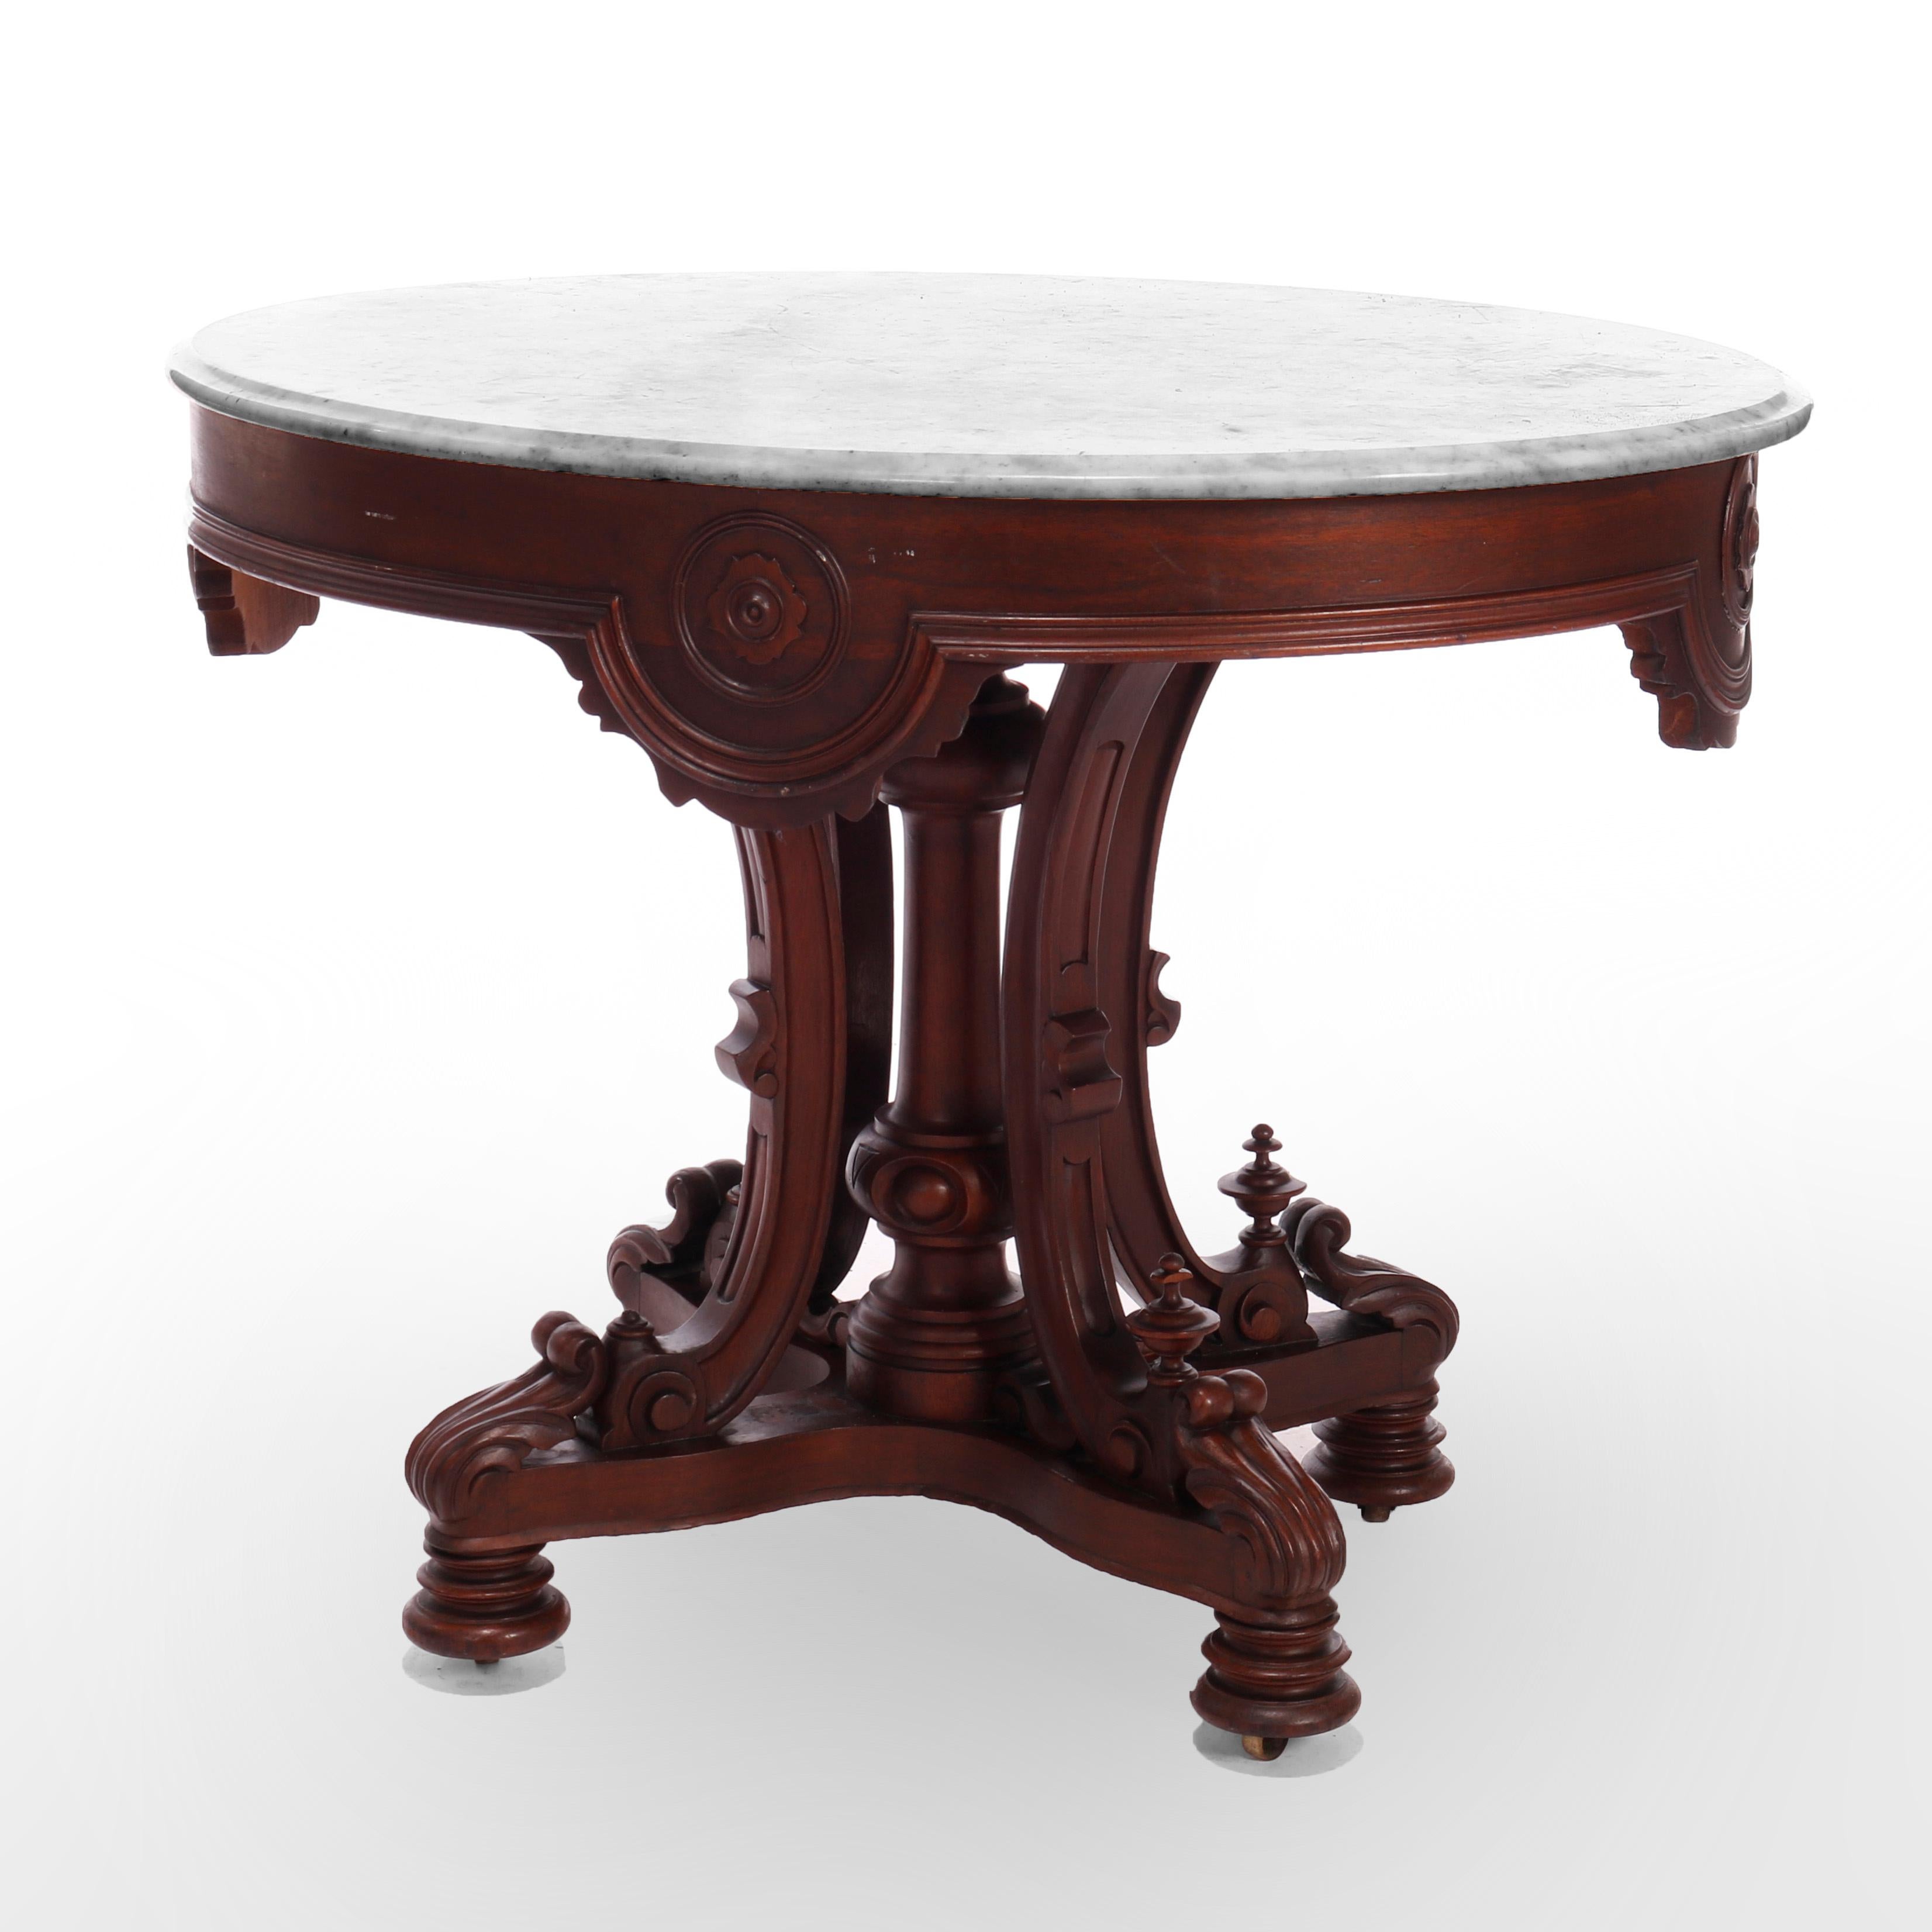 An antique Rococo Revival parlor table offers oval and beveled marble top over rosewood base having shaped skirt and raised on scroll form legs with center turned column, c1870

Measures - 28.5'' H x 36'' W x 27'' D.

Catalogue Note: Ask about